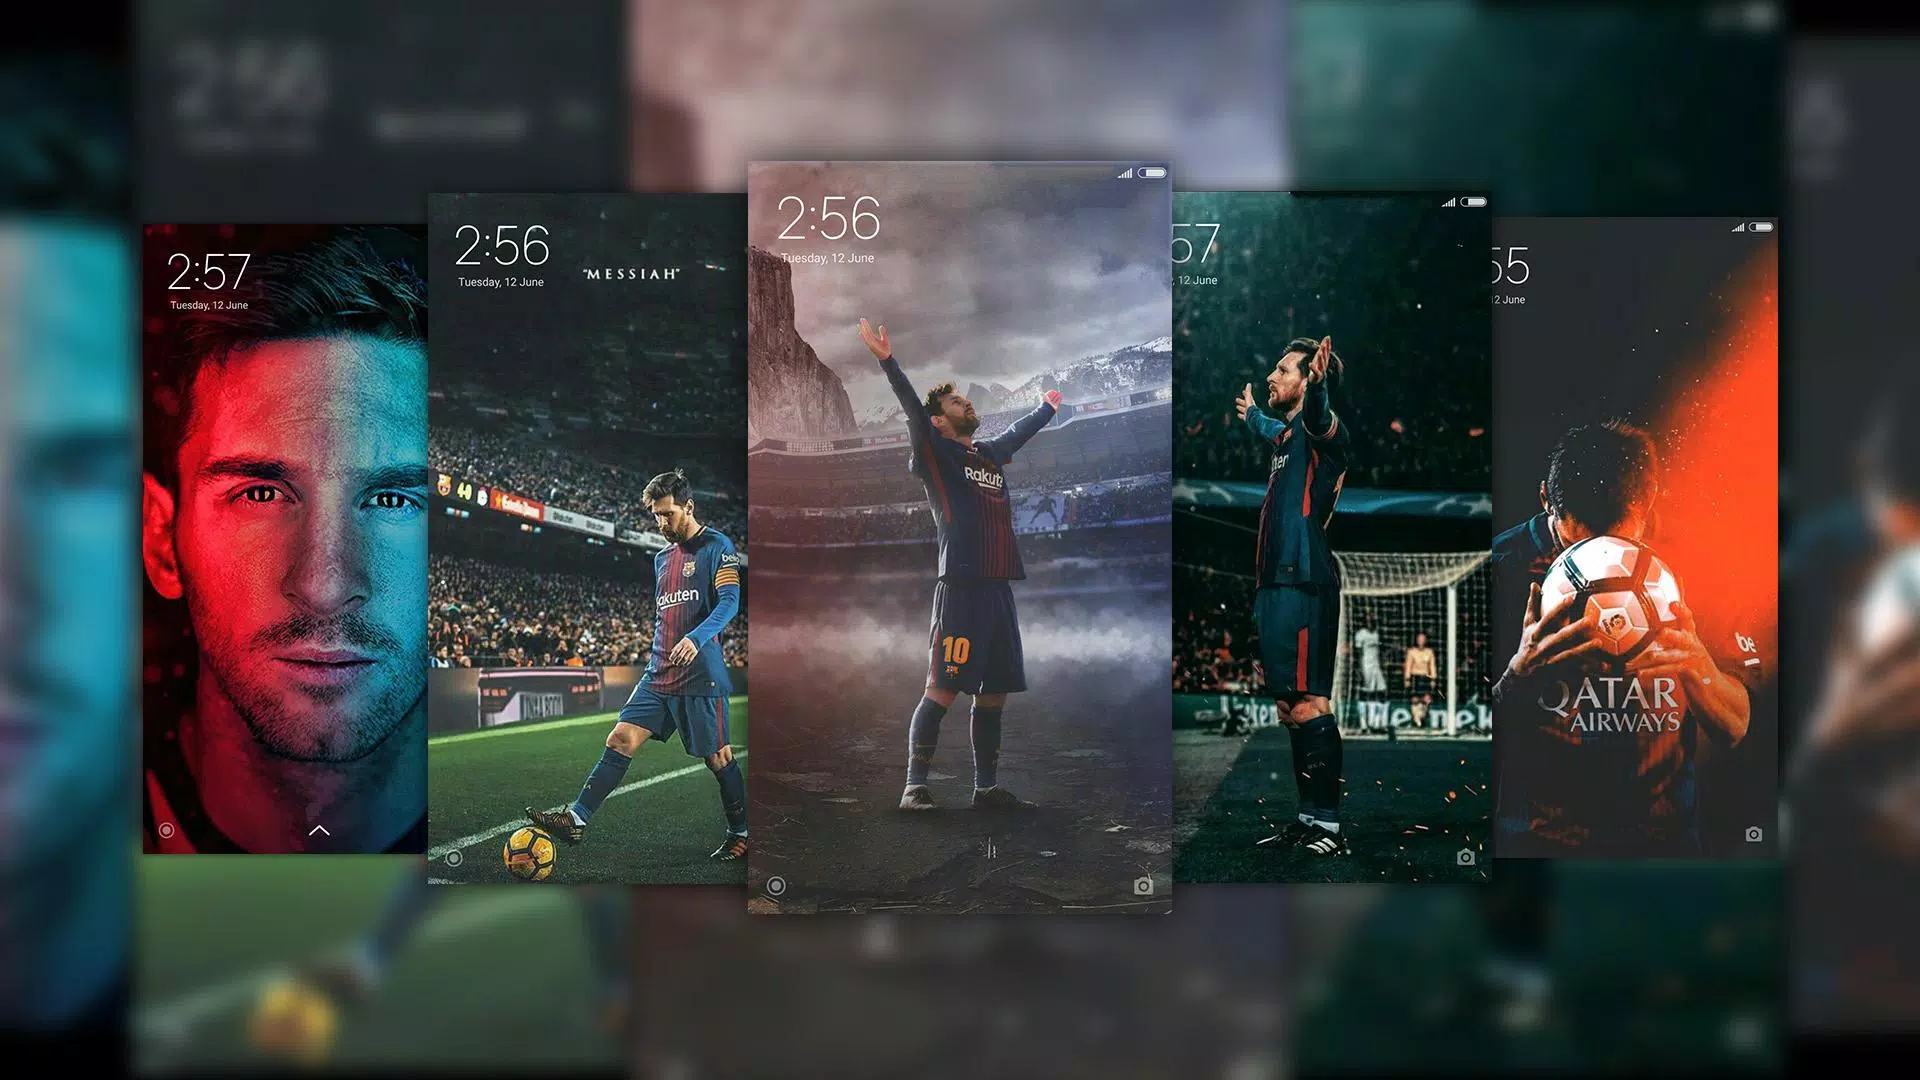 Tải xuống APK 🔥 Lionel Messi Wallpapers 4K | Full HD 😍 cho Android